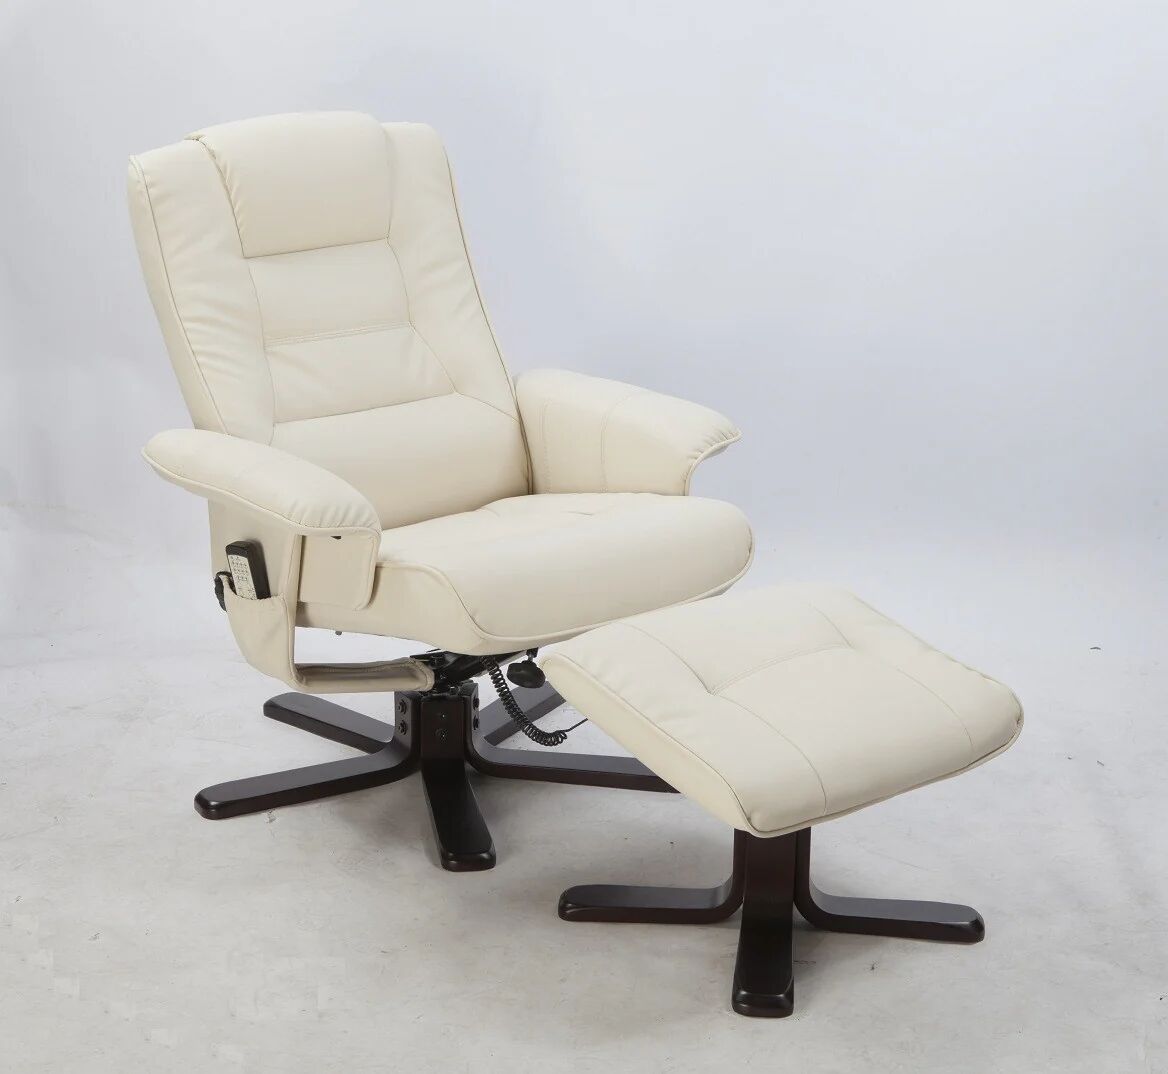 Unbranded Massage Recliner with Footrest - Cream